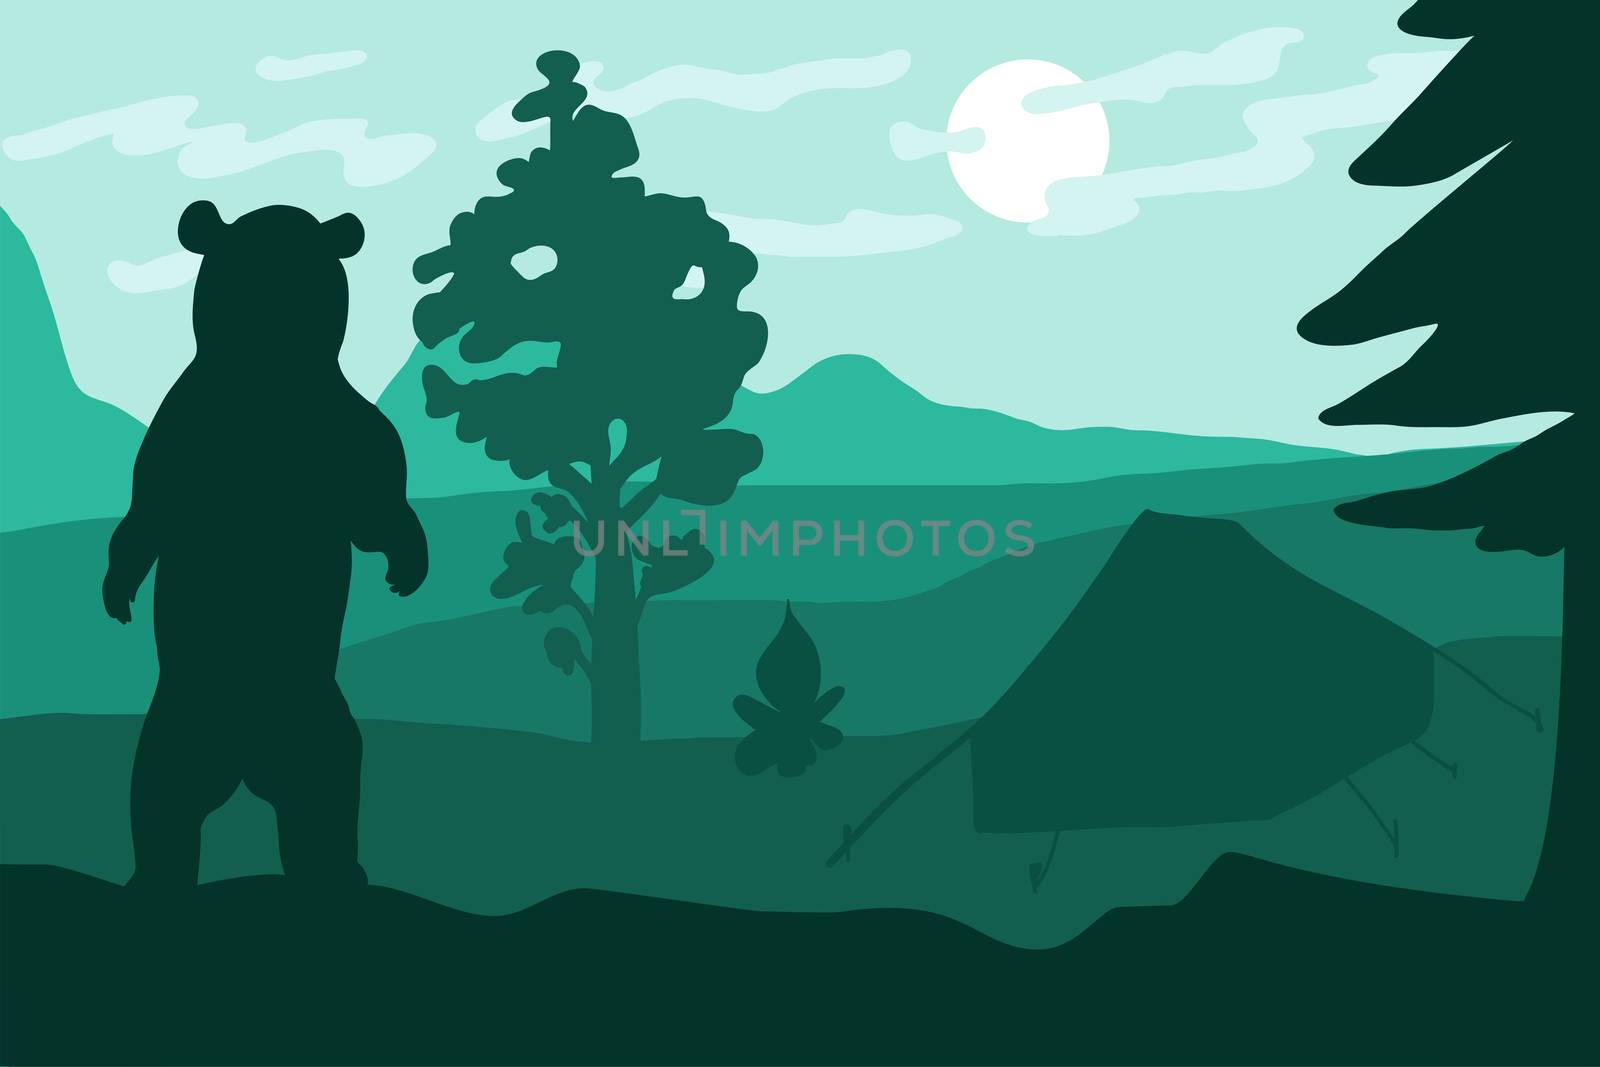 Standing wild bear in camping near forest and mountains. Outdoor landscape and panorama in green colors. Vector